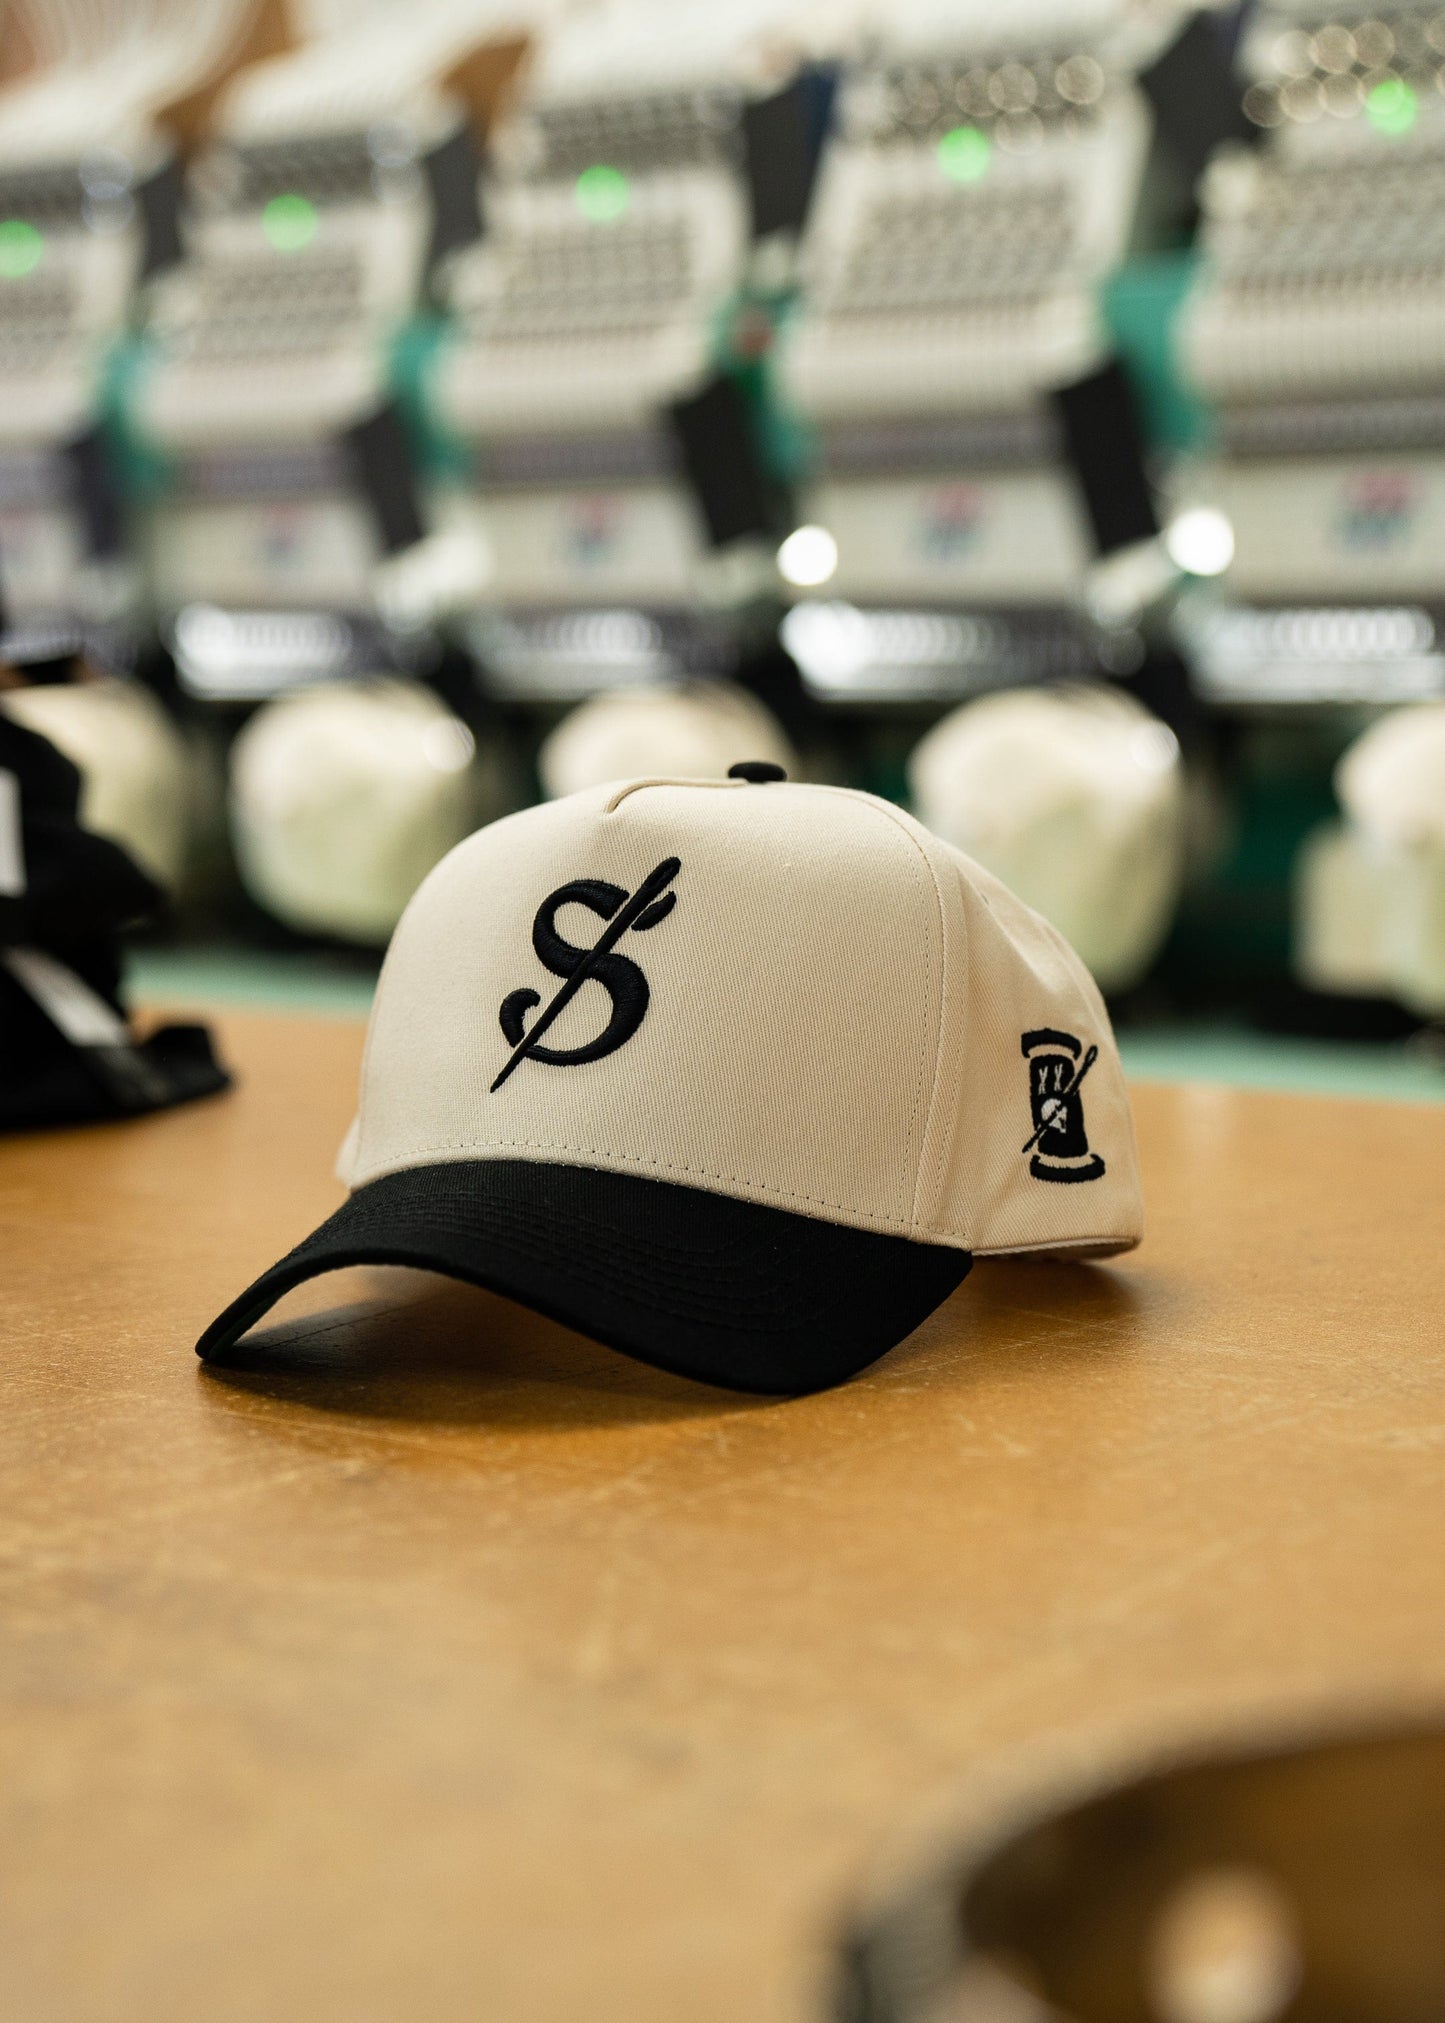 100 Baseball Caps w/ 2 Locations Package Deal